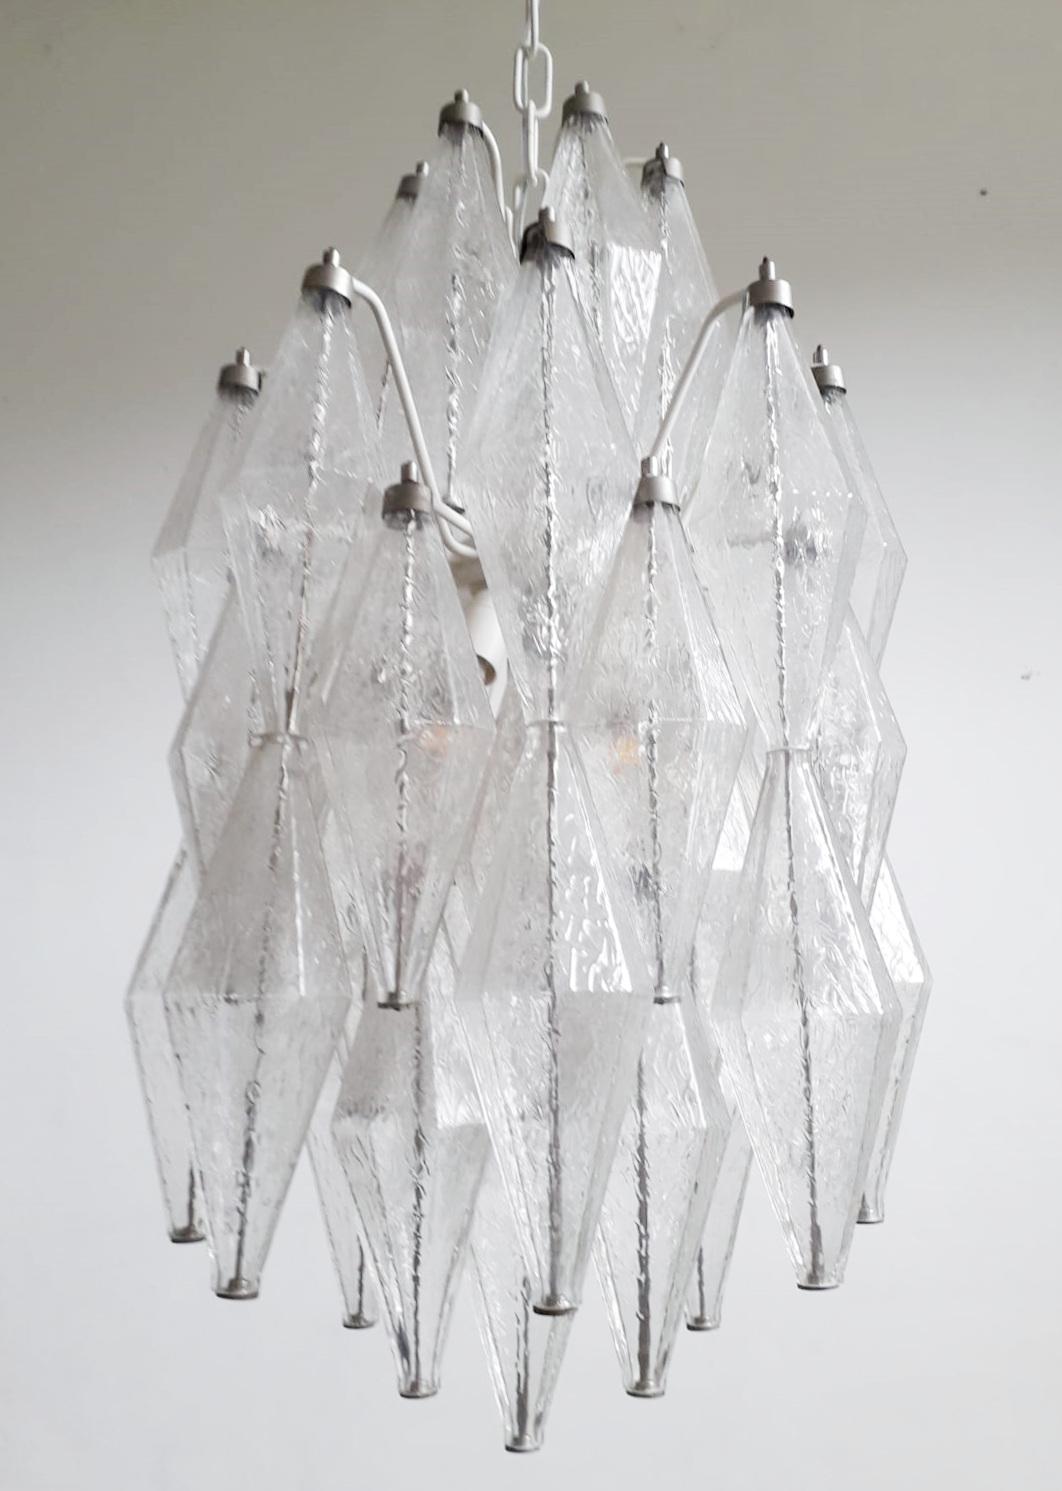 Vintage Italian chandelier with clear hand blown polyhedron/polyhedral shaped Murano glasses suspended on white metal frame / Made in Italy by Venini, circa 1950s
Measures: diameter 15 inches, chandelier height 23.5 inches, total height 42 inches